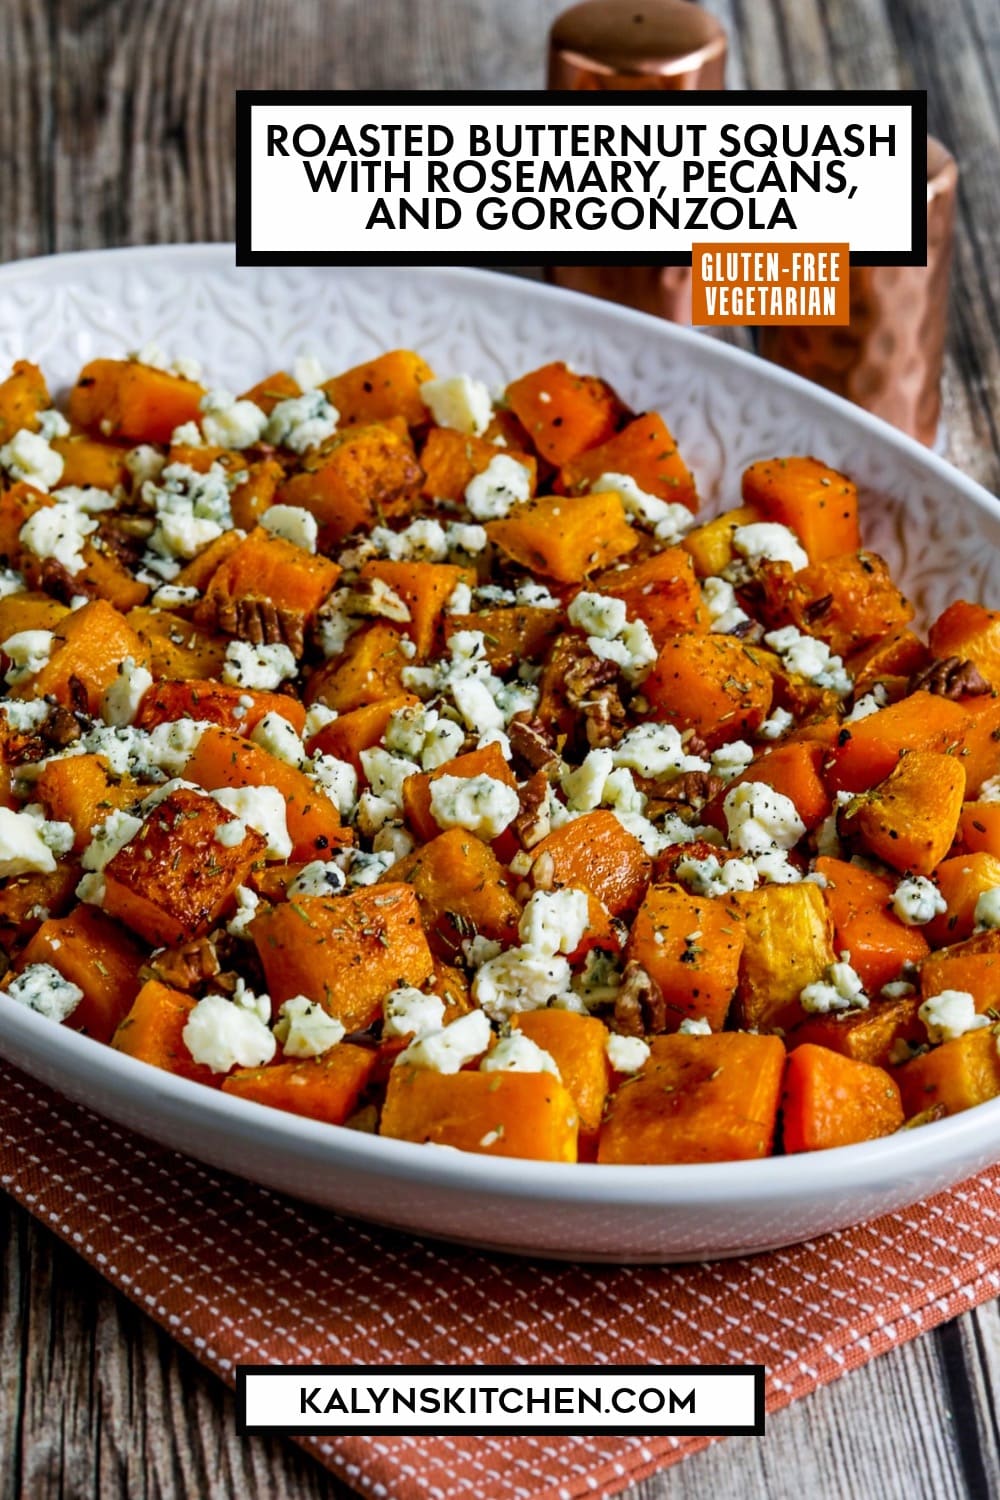 Pinterest image of Roasted Butternut Squash with Rosemary, Pecans, and Gorgonzola